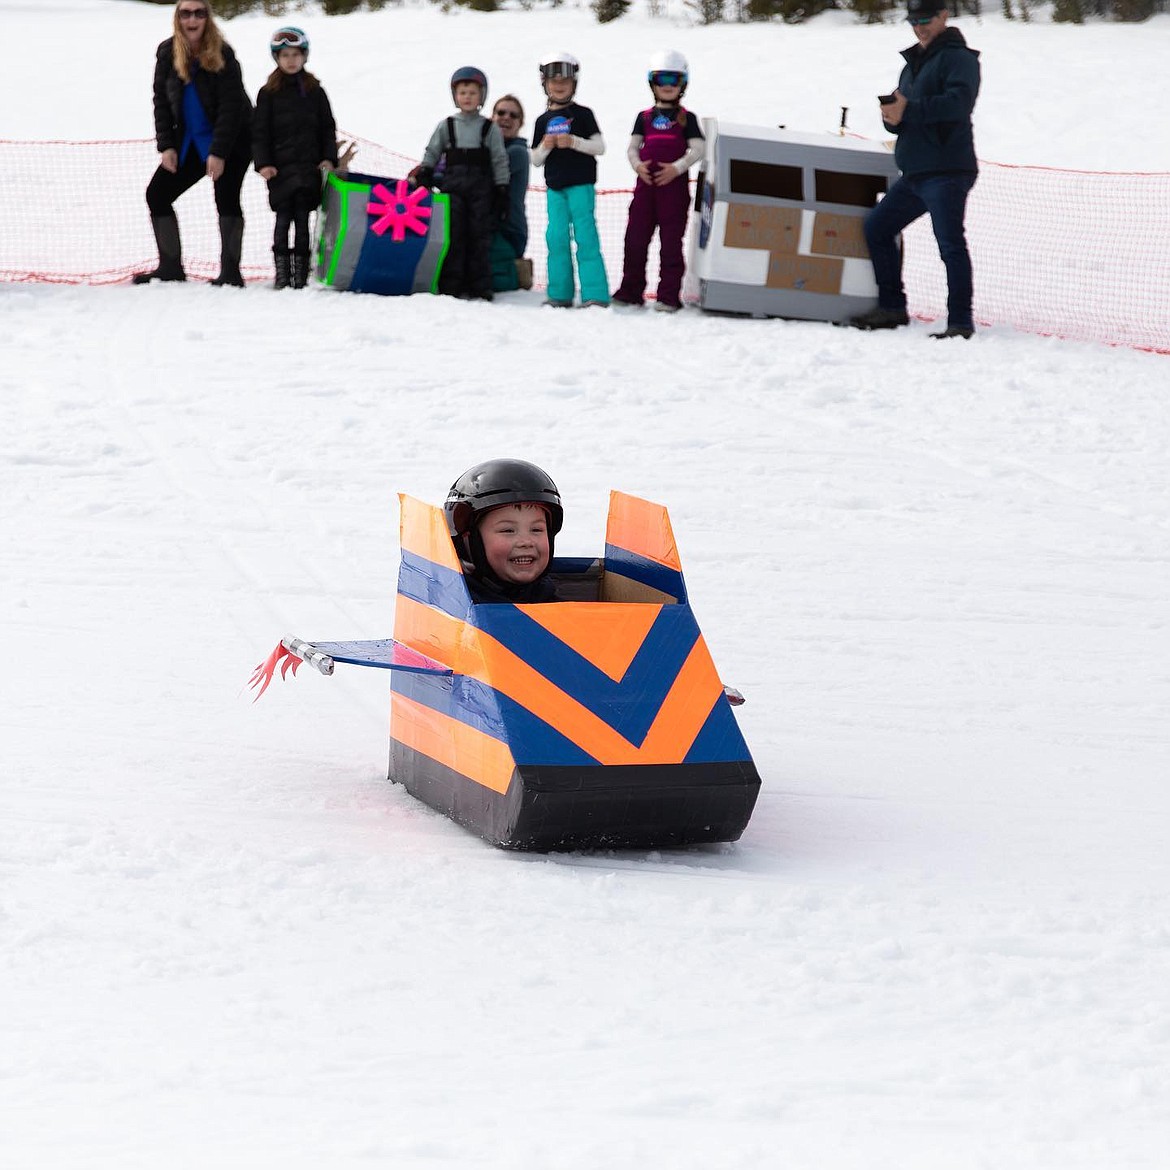 The cardboard box derby is a testament to the power of imagination and creativity.